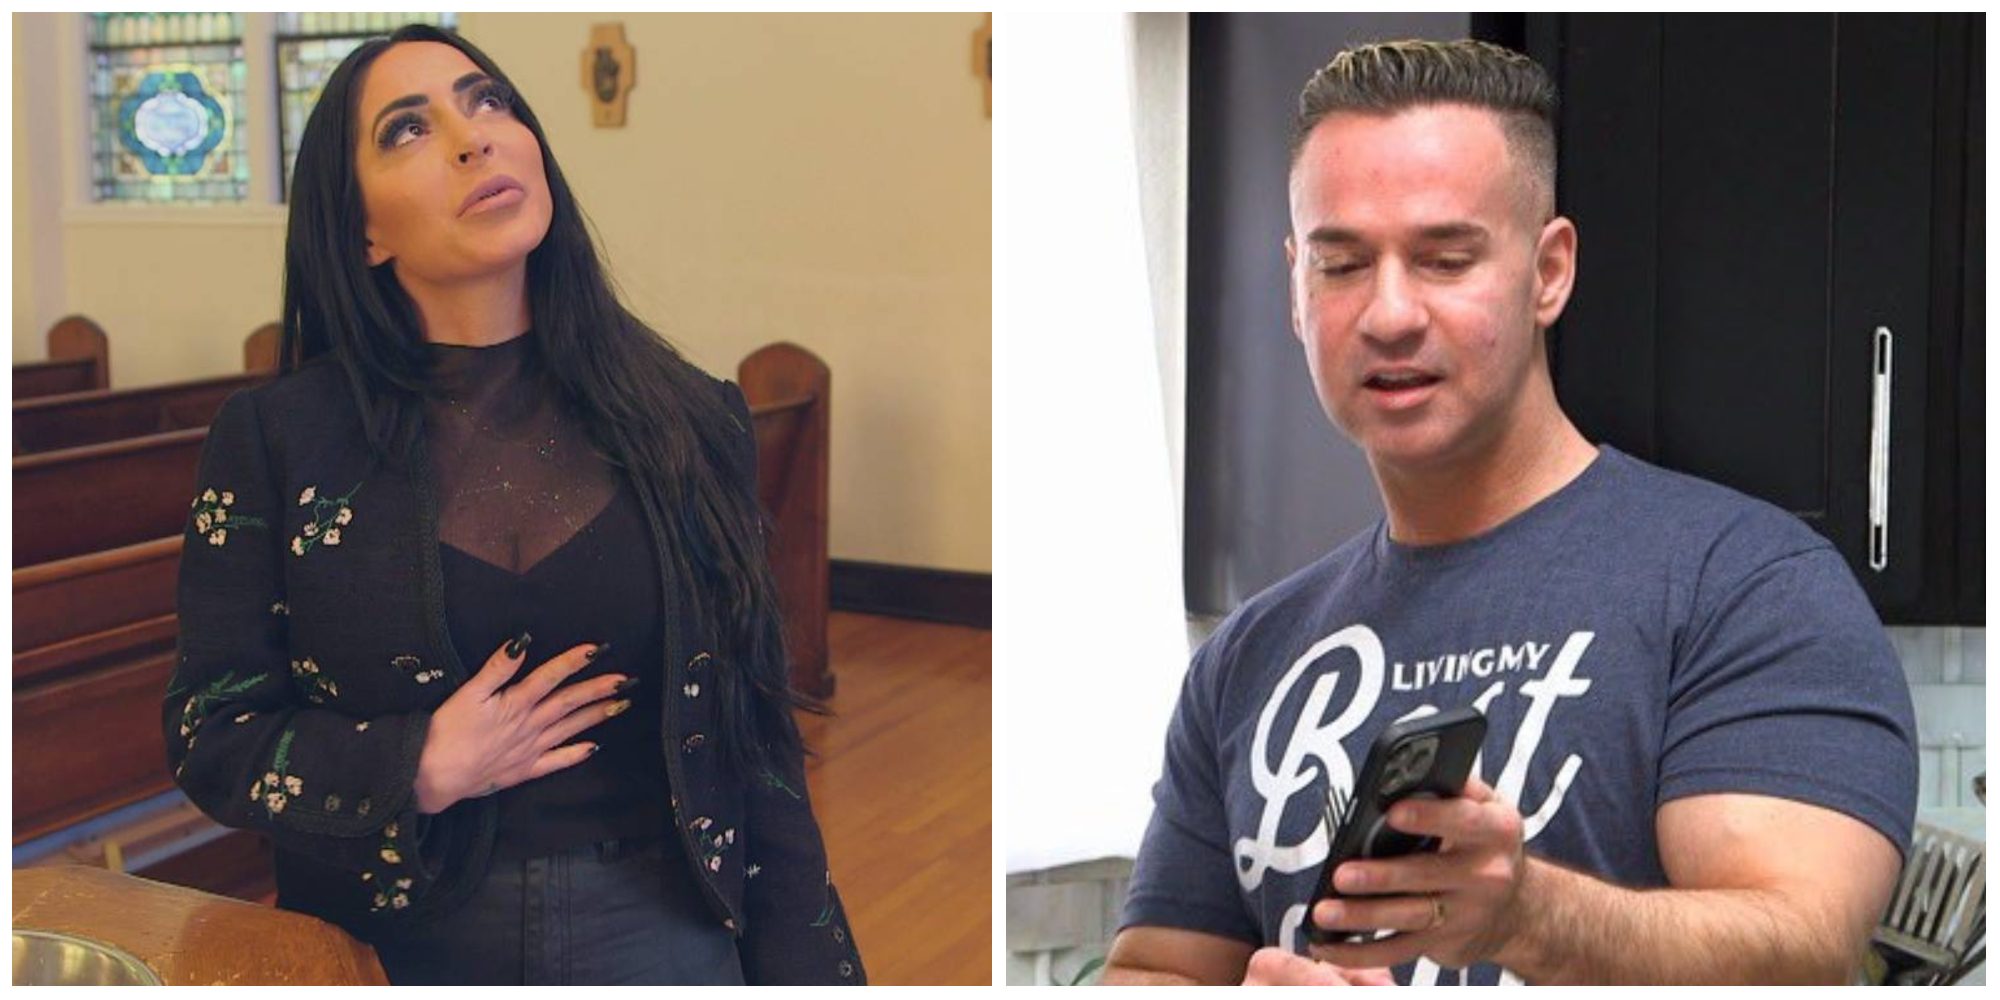 Angelina Pivarnick blesses herself in church; Mike 'The Situation' Sorrentino shows off something on his phone in 'Jersey Shore: Family Vacation' Season 5